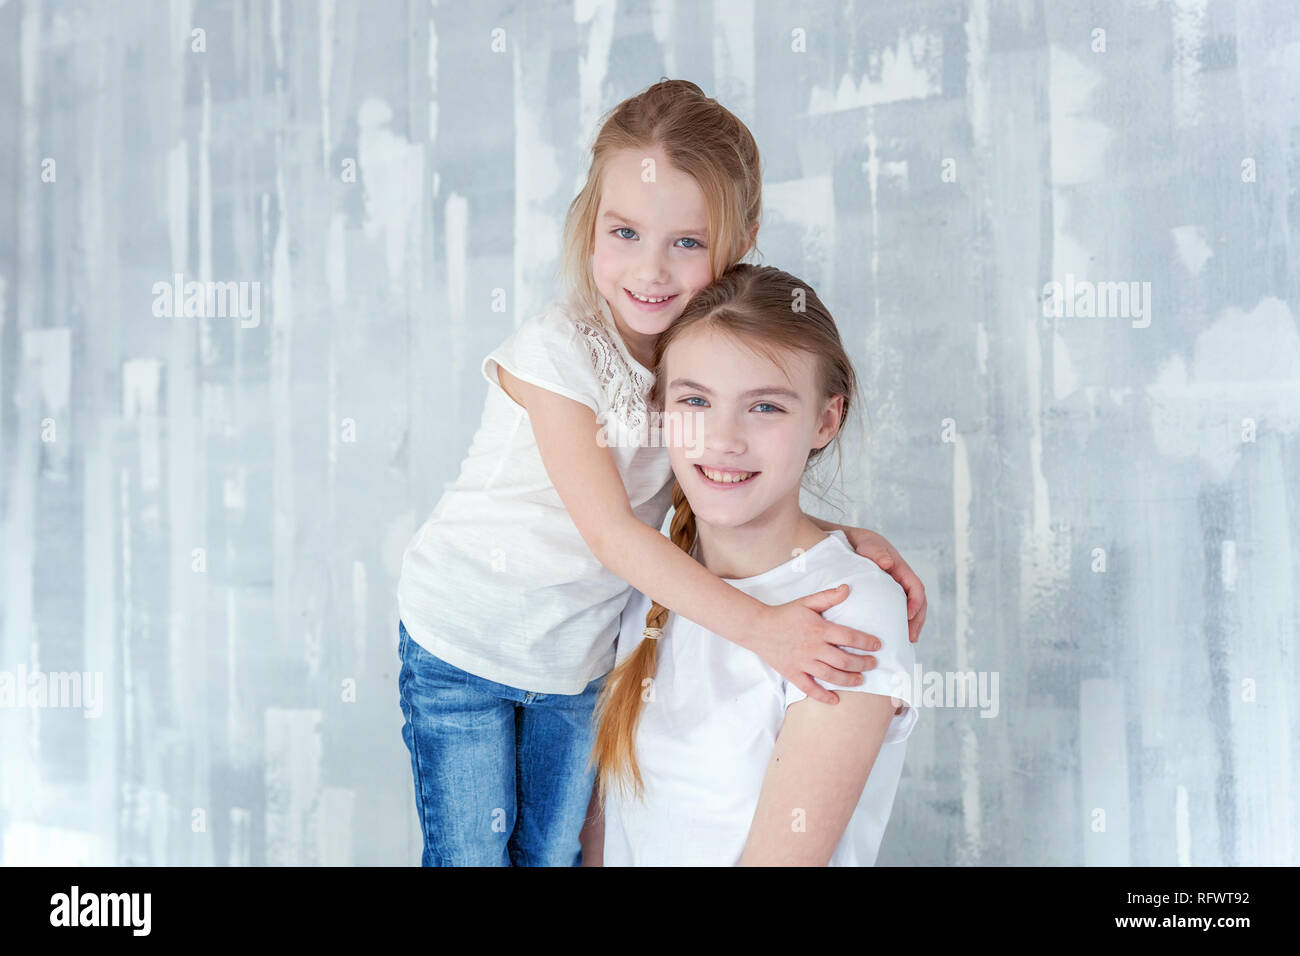 Two happy kids standing against grey textured wall background and ...